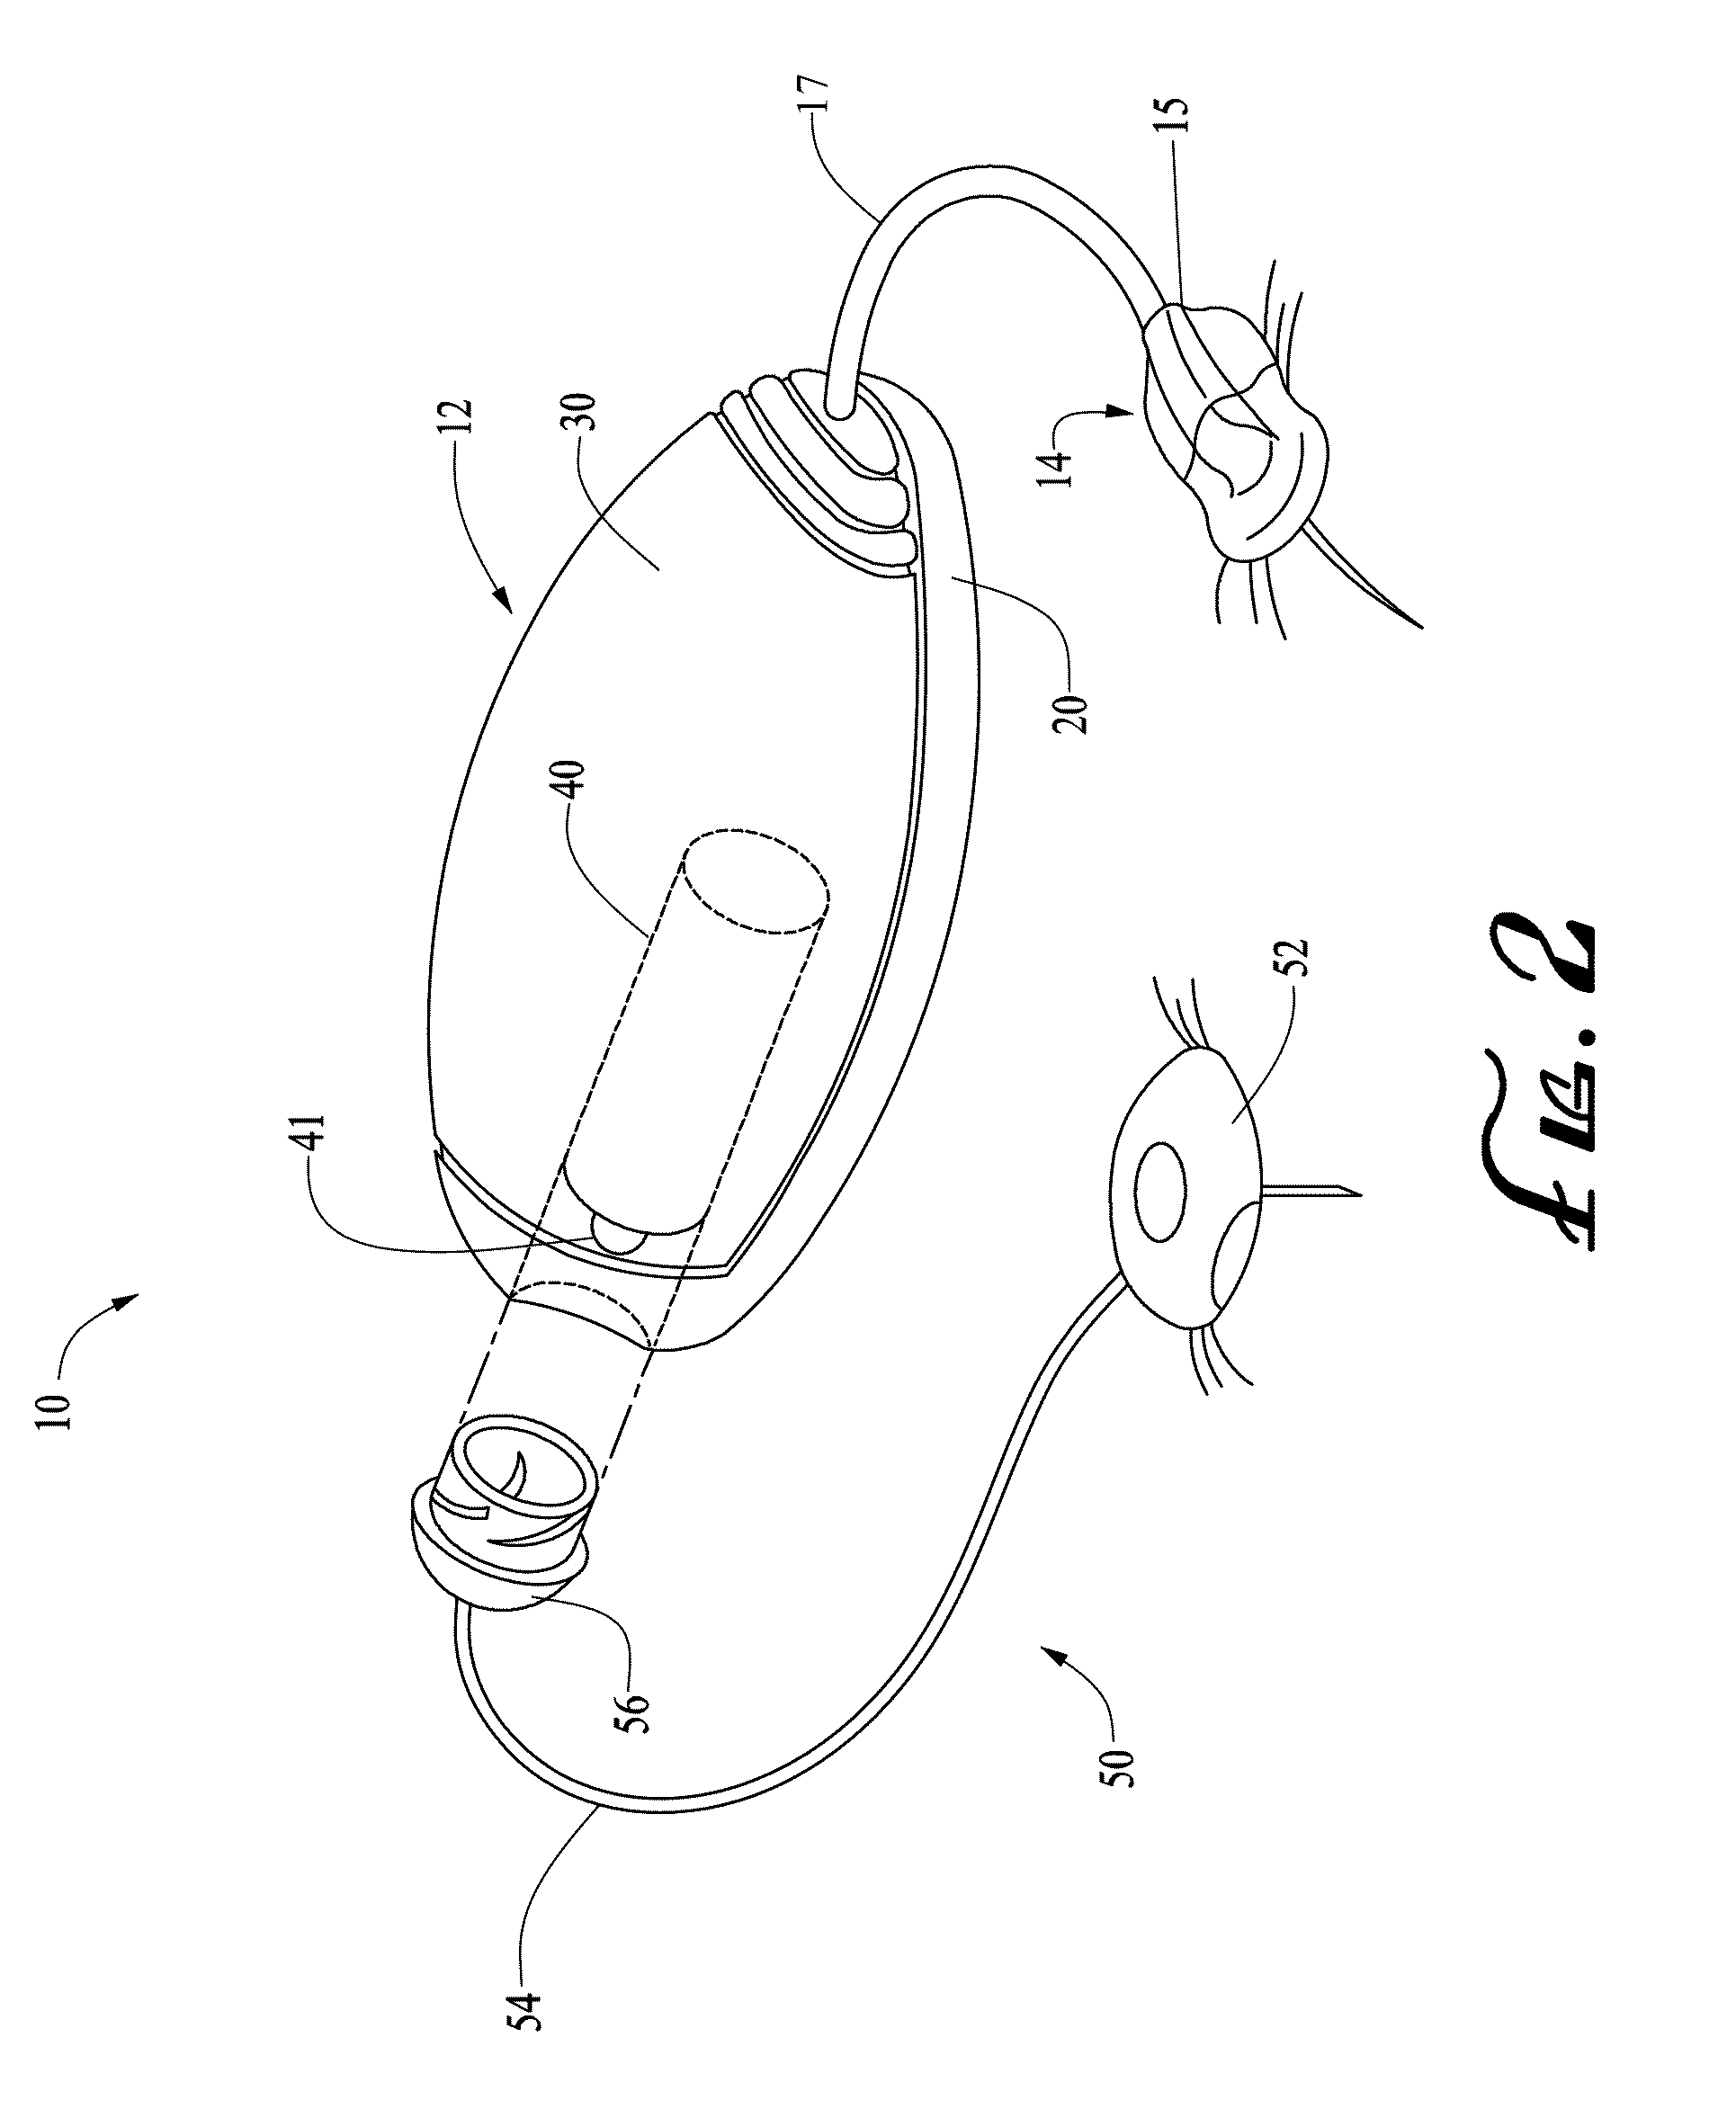 Reservoir plunger head systems and methods